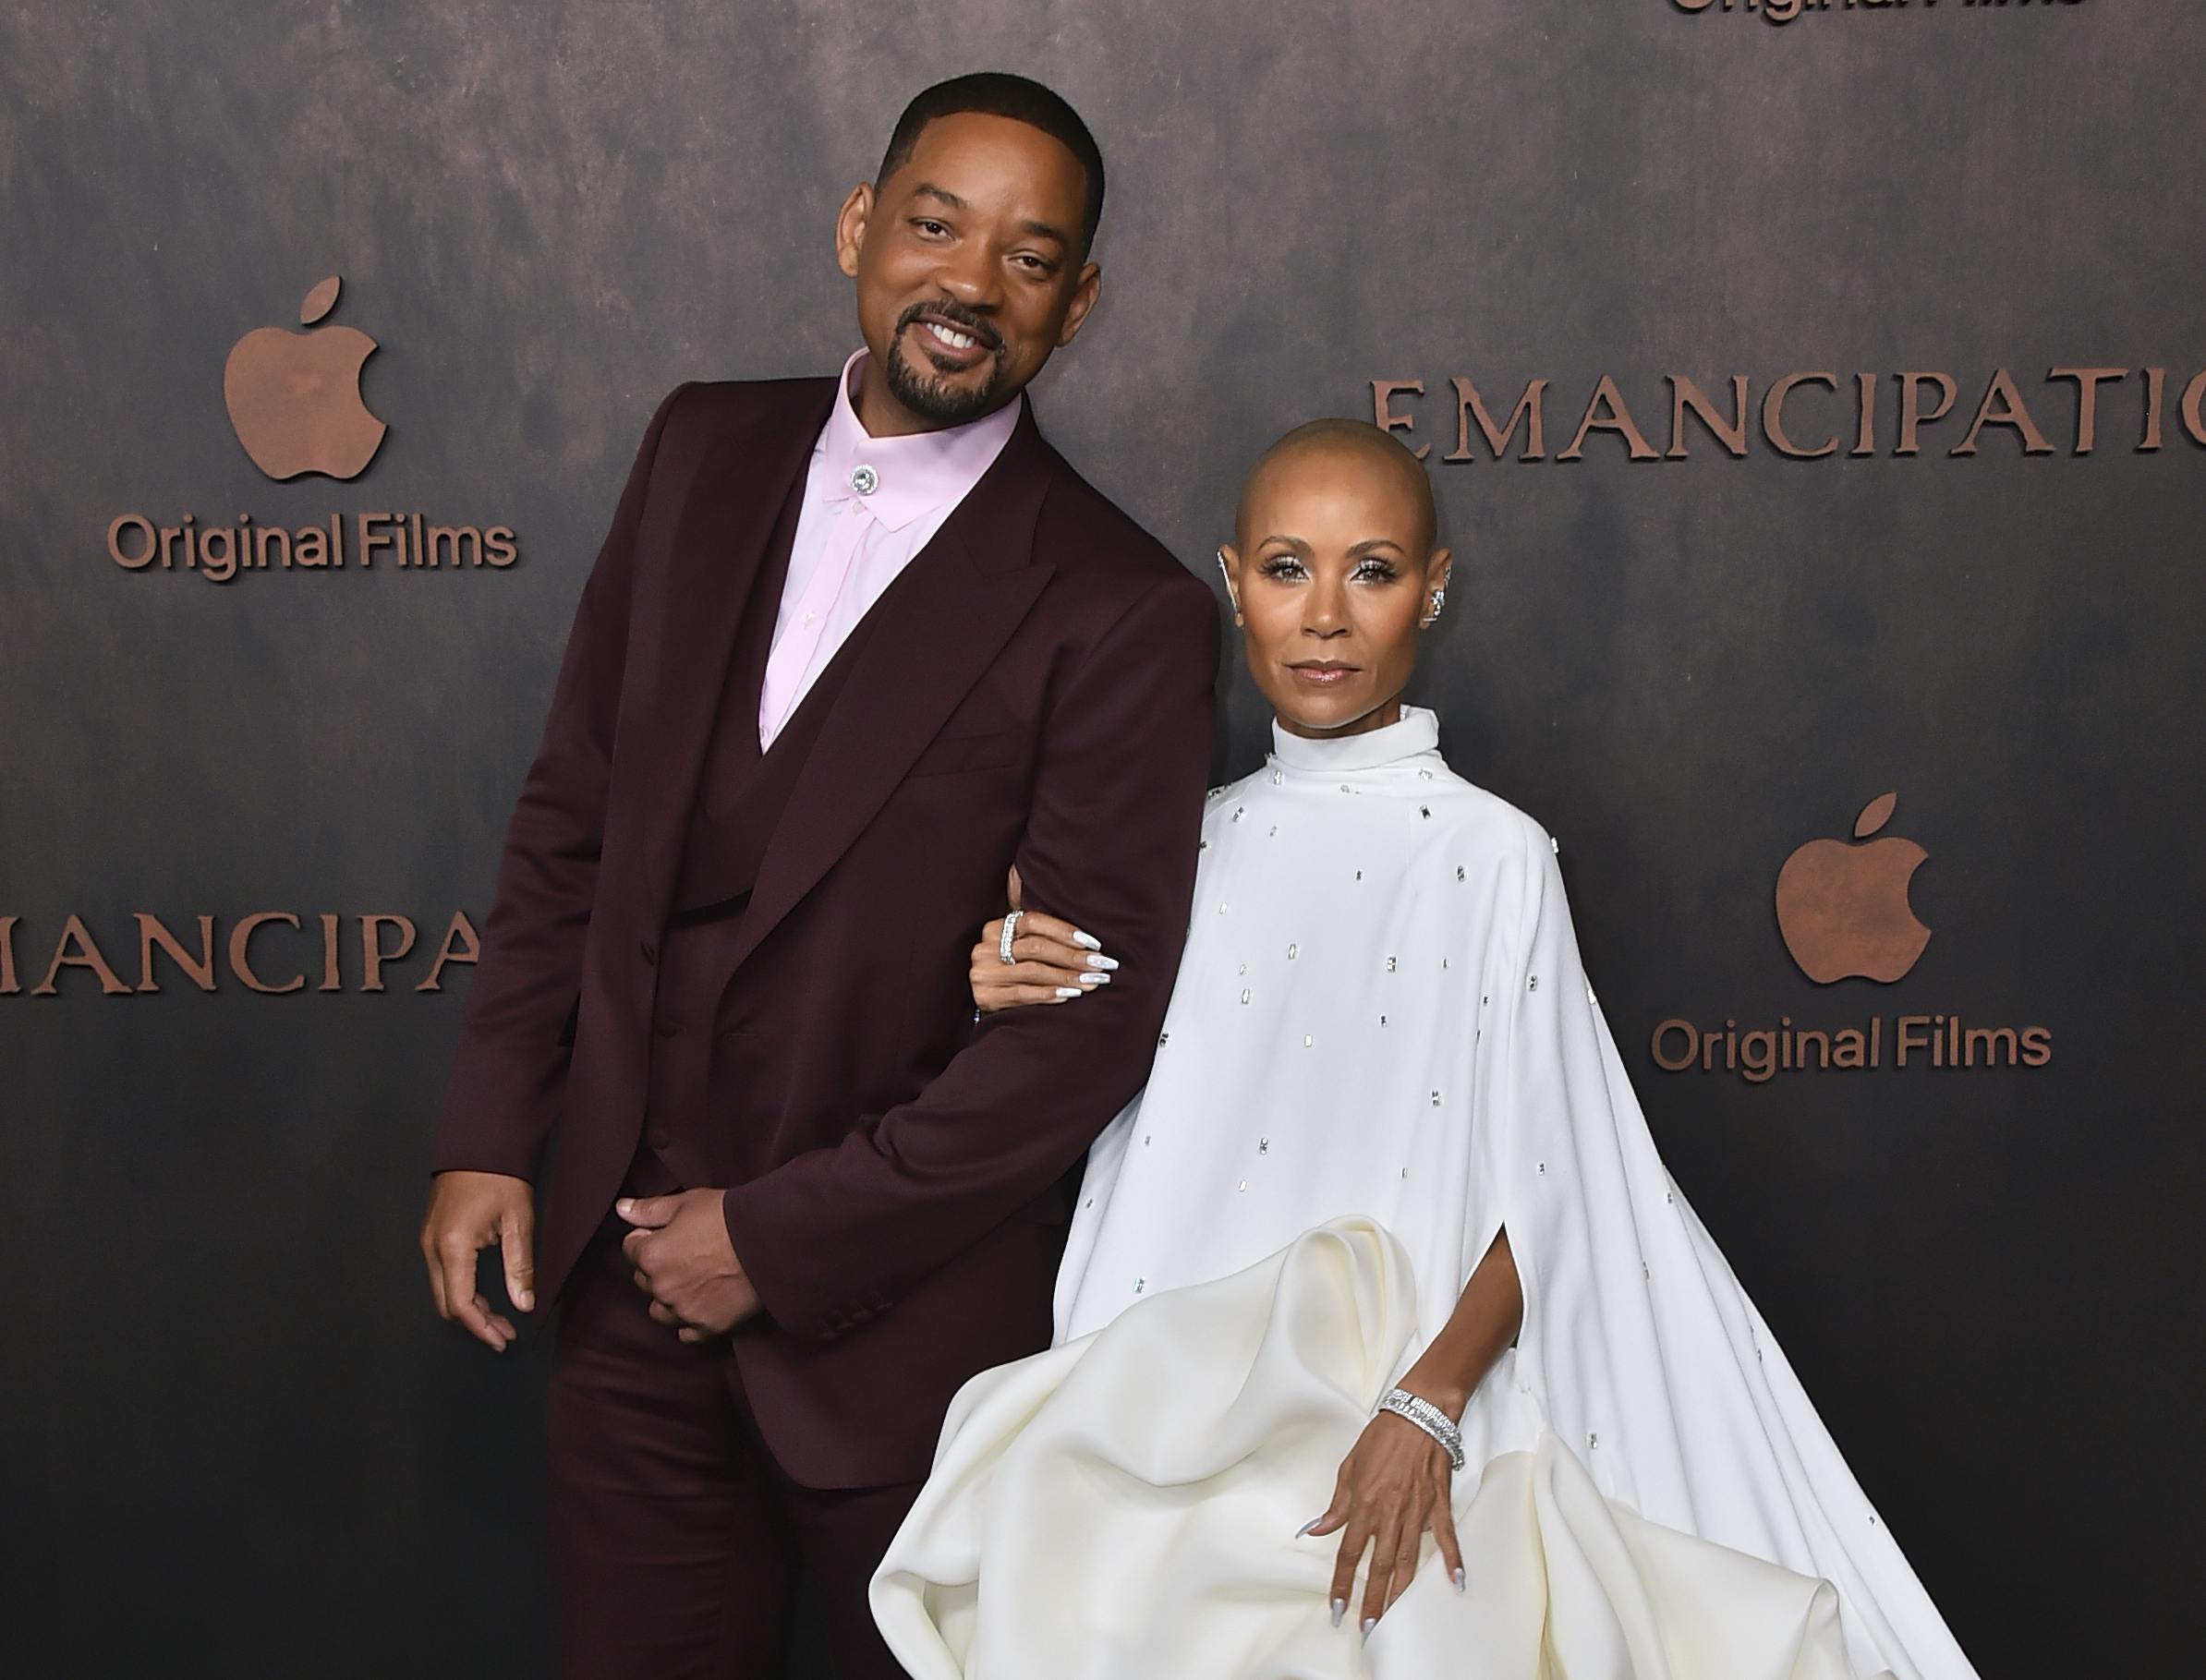 Will Smith, left, and Jada Pinkett Smith arrive at the premiere of "Emancipation, " Wednesday, Nov. 30, 2022, at the Regency Village Theatre in Los Angeles. (Photo by Jordan Strauss/Invision/AP)